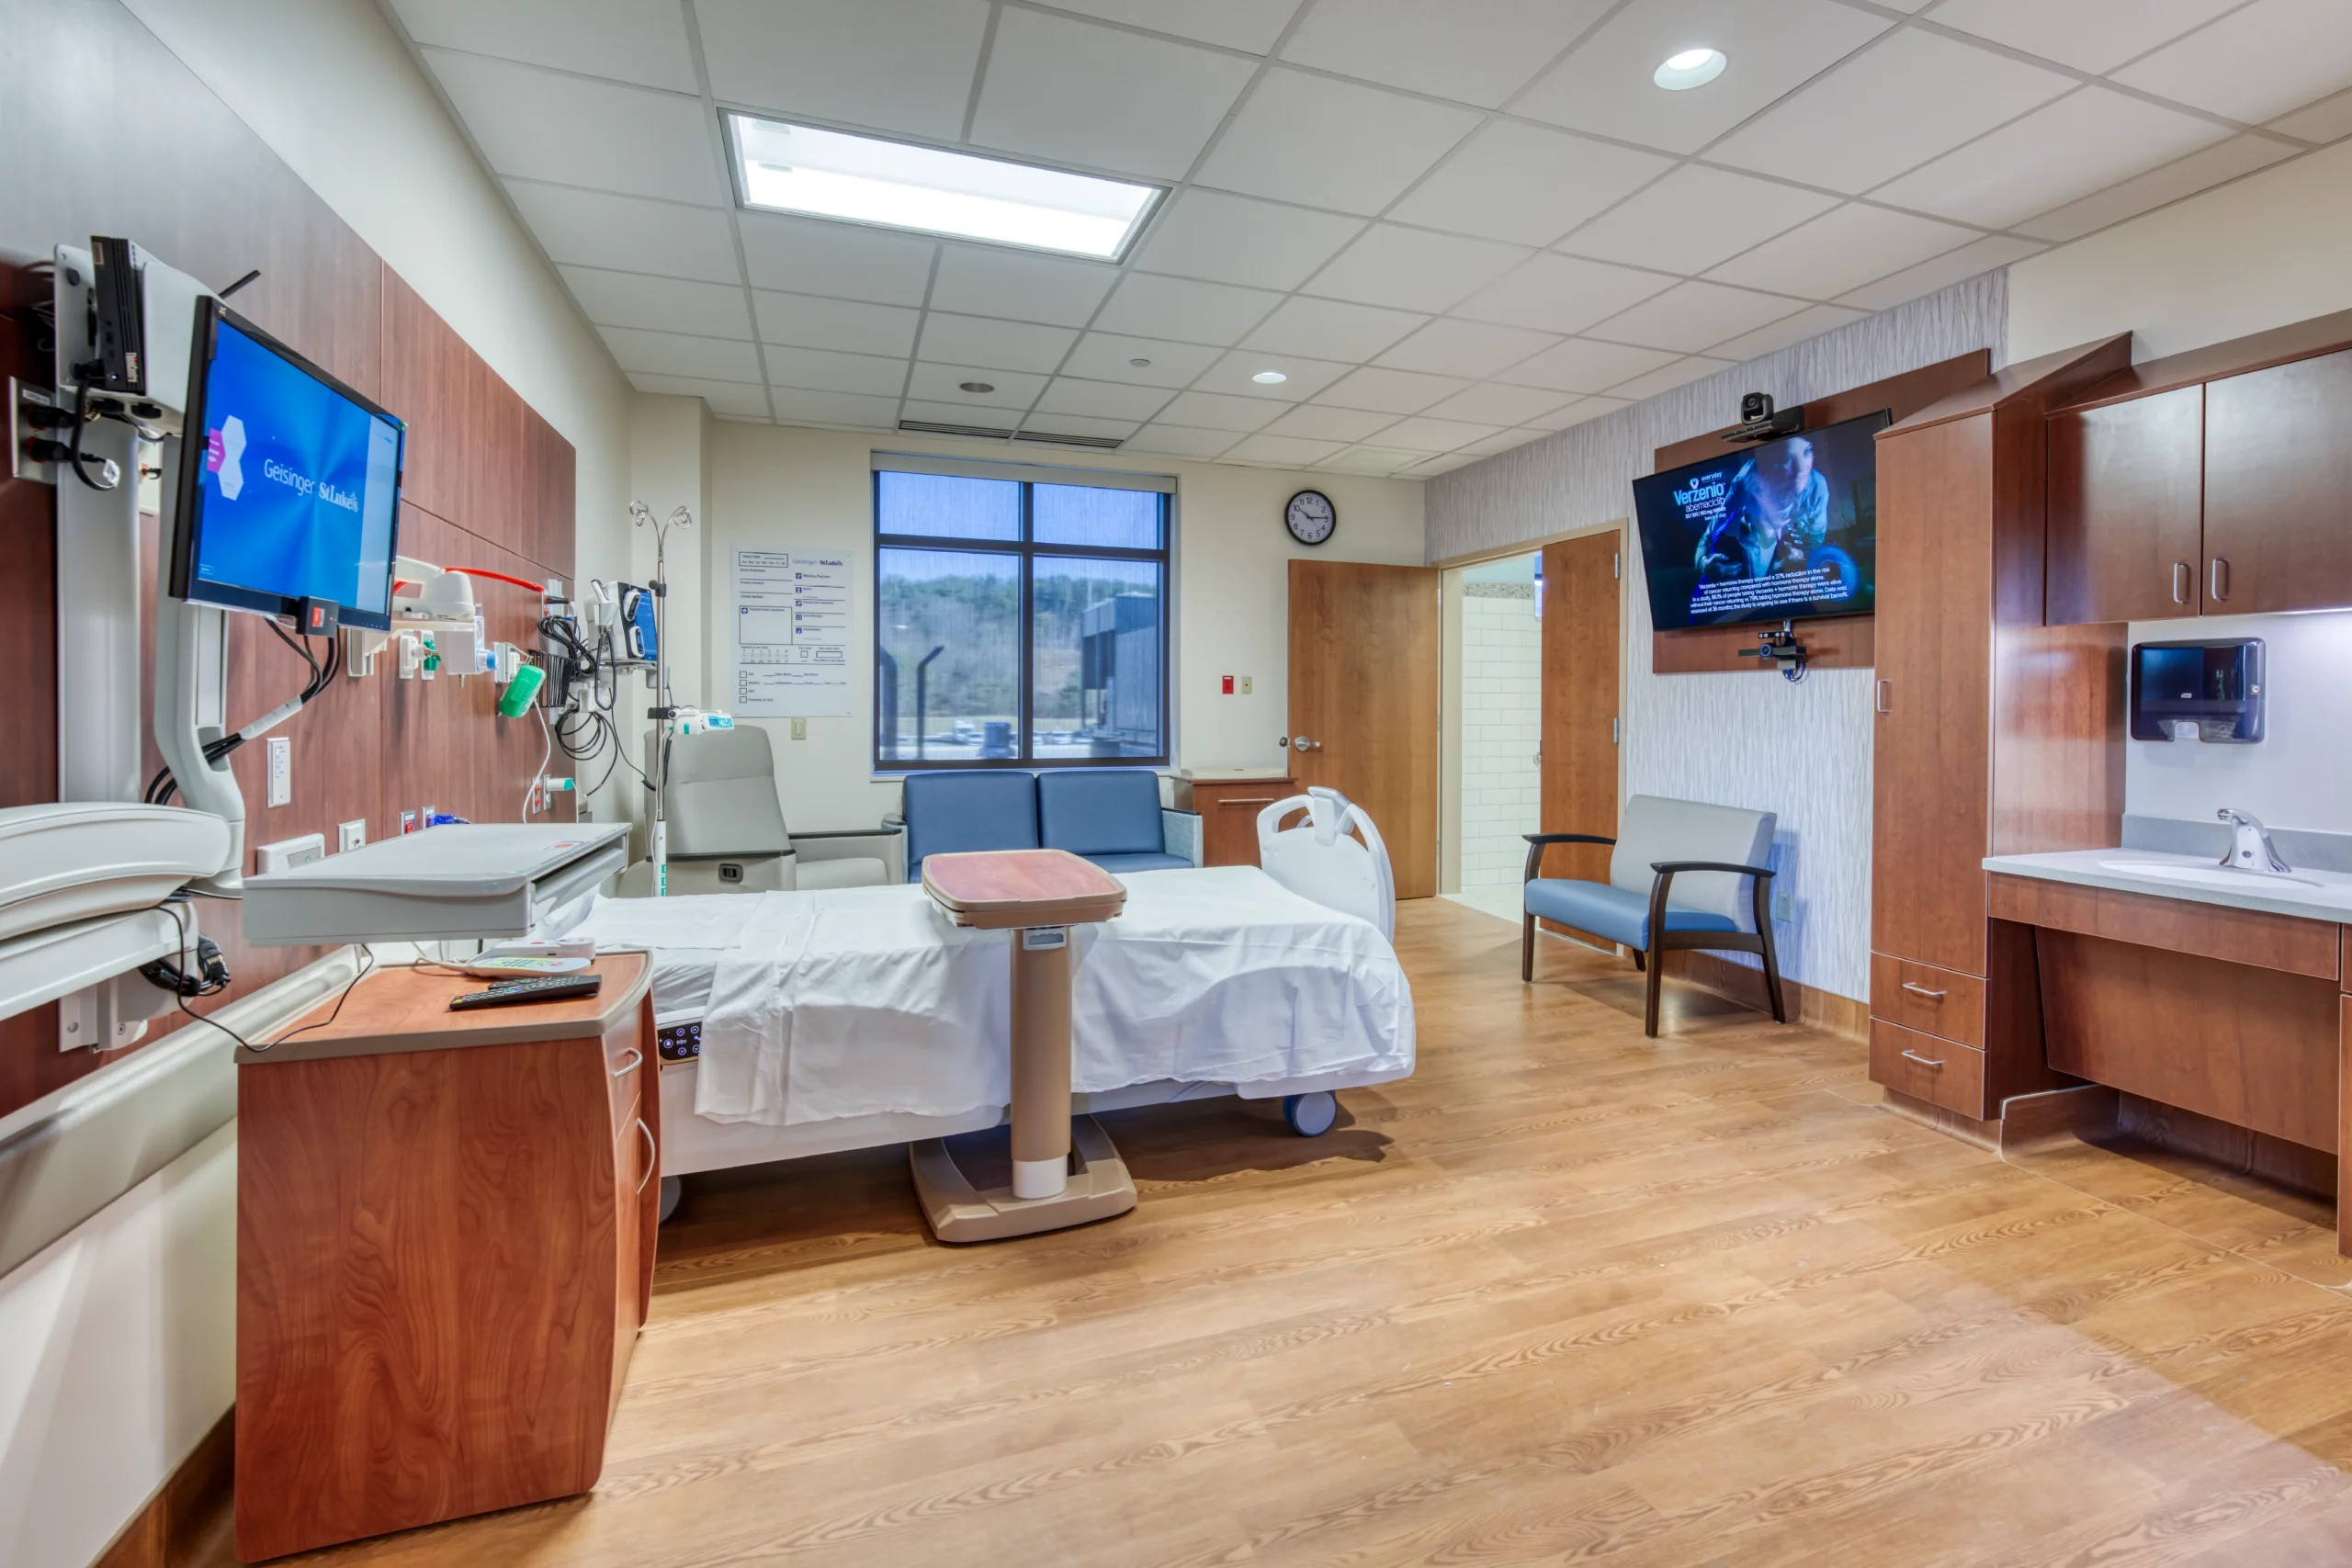 40 additional medical-surgical beds were added with this renovation at Geisinger St. Luke's Hospital.